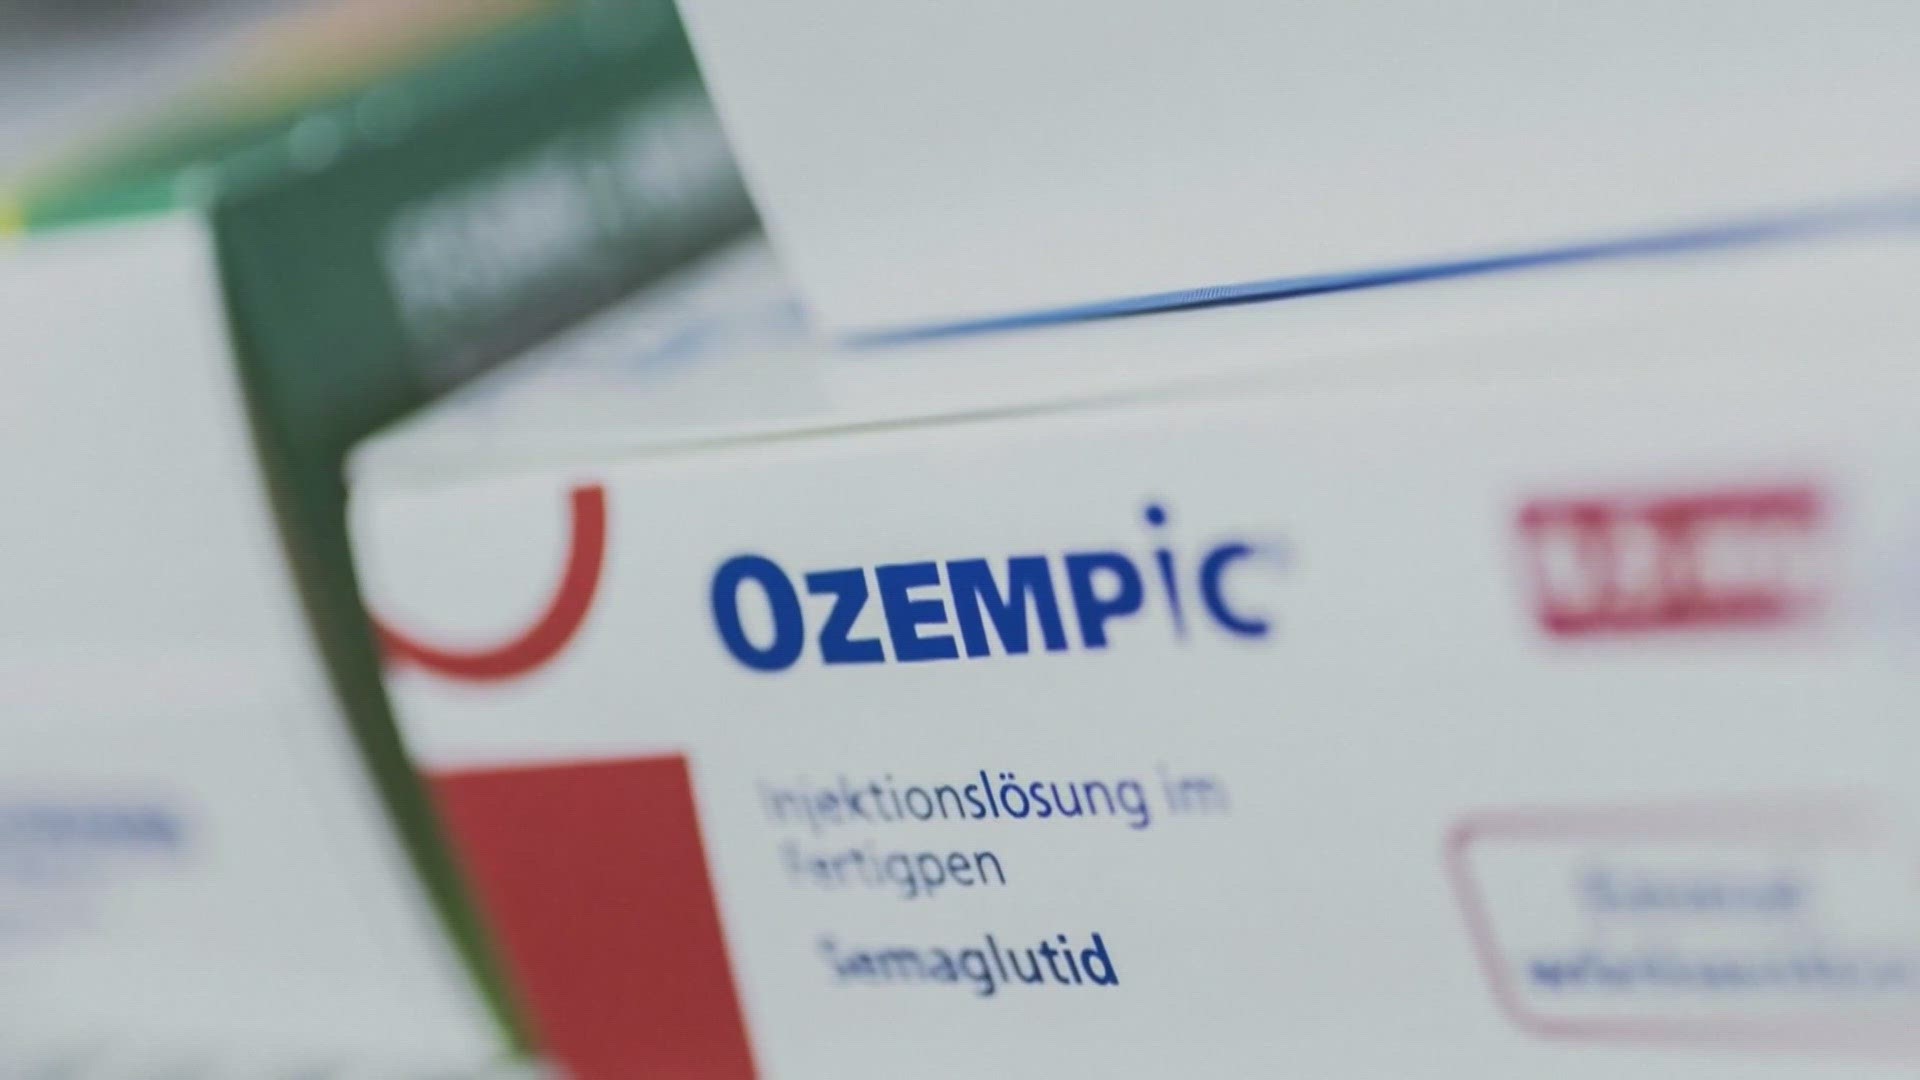 The Diabetes medicine Ozempic has become a big talker on social media, being used as a weight loss drug, but what are the risks and rewards? 6 News breaks it down.